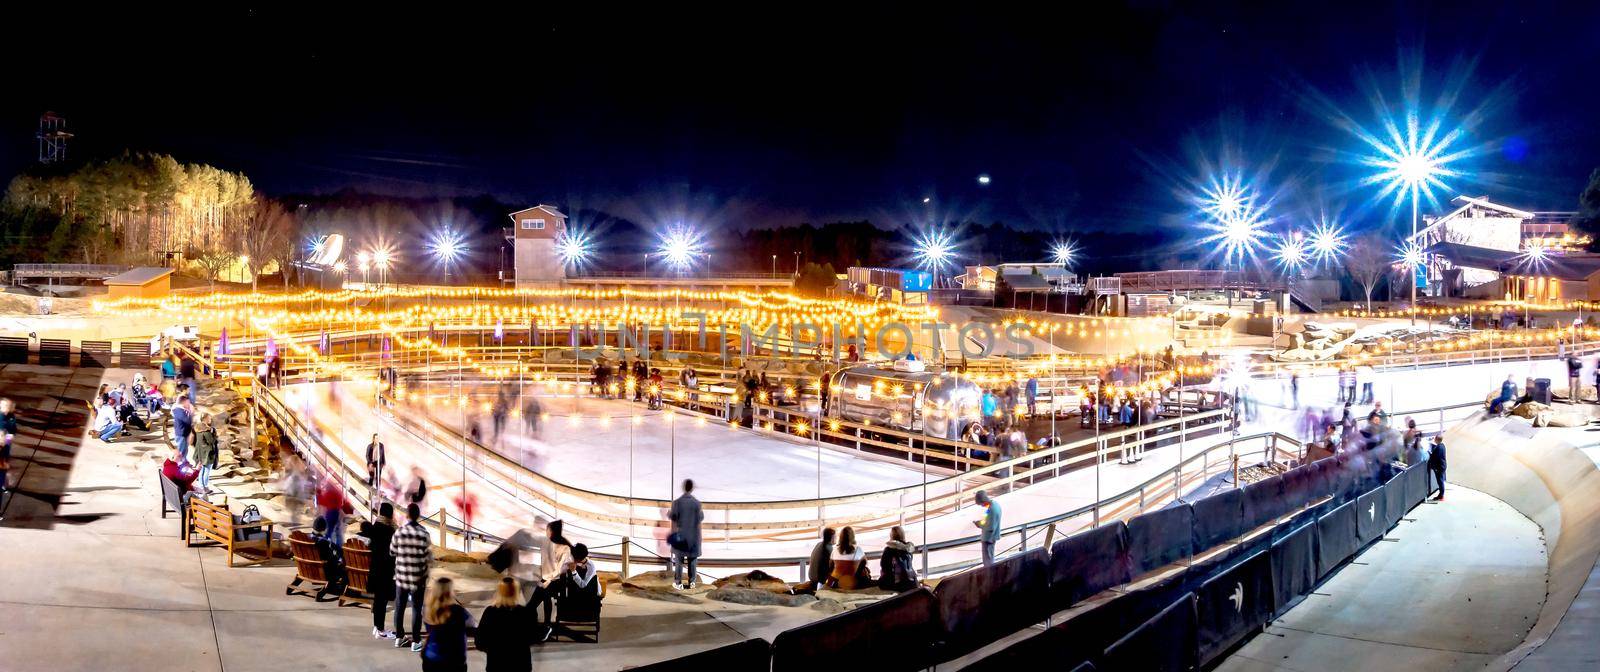 beautiful outdoor ice rink at night with lights by digidreamgrafix